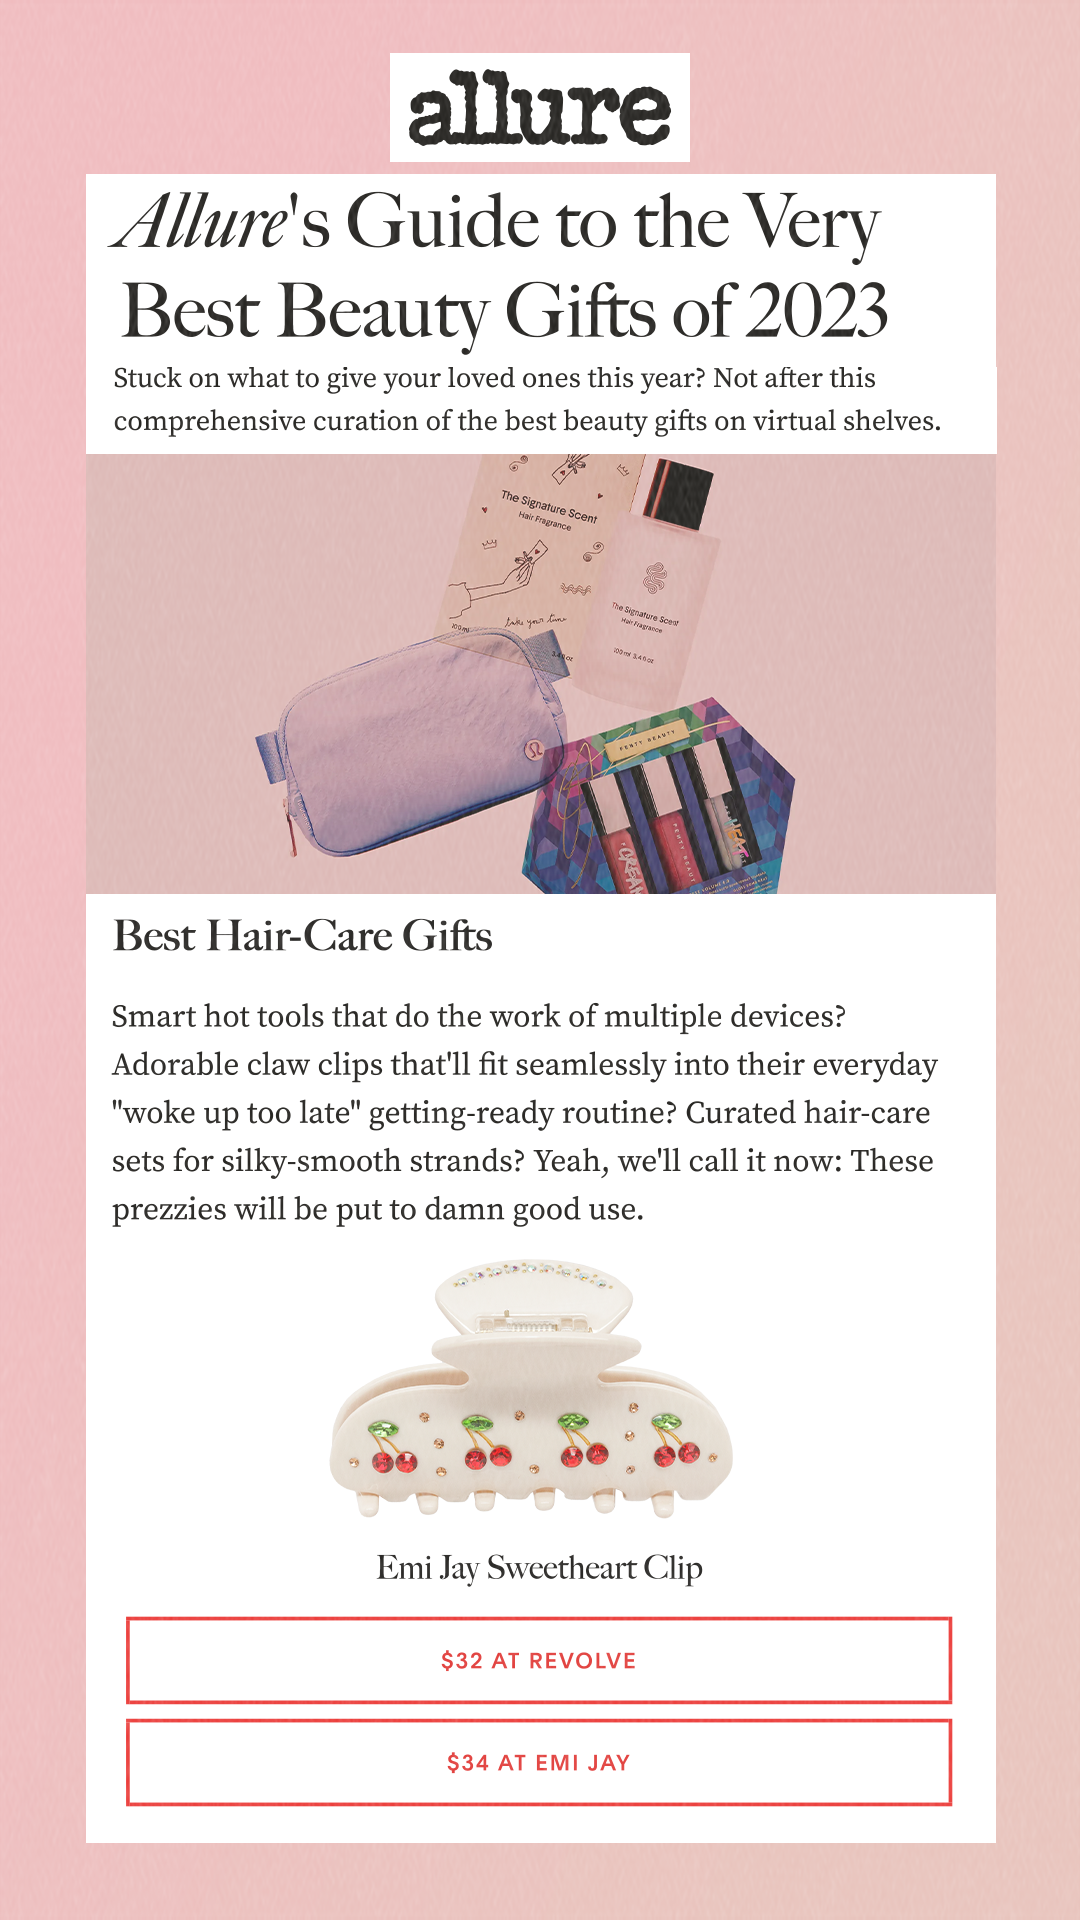 Allure's Guide to the Very Best Beauty Gifts of 2023Stuck on what to give your loved ones this year? Not after this comprehensive curation of the best beauty gifts on virtual shelves. Best Hair-Care GiftsSmart hot tools that do the work of multiple devices? Adorable claw clips that'll fit seamlessly into their everyday 'woke up too late' getting-ready routine? Curated hair-care sets for silky-smooth strands? Yeah, we'll call it now: These prezzies will be put to damn good use. $32 at Revolve$34 at Emi Jay